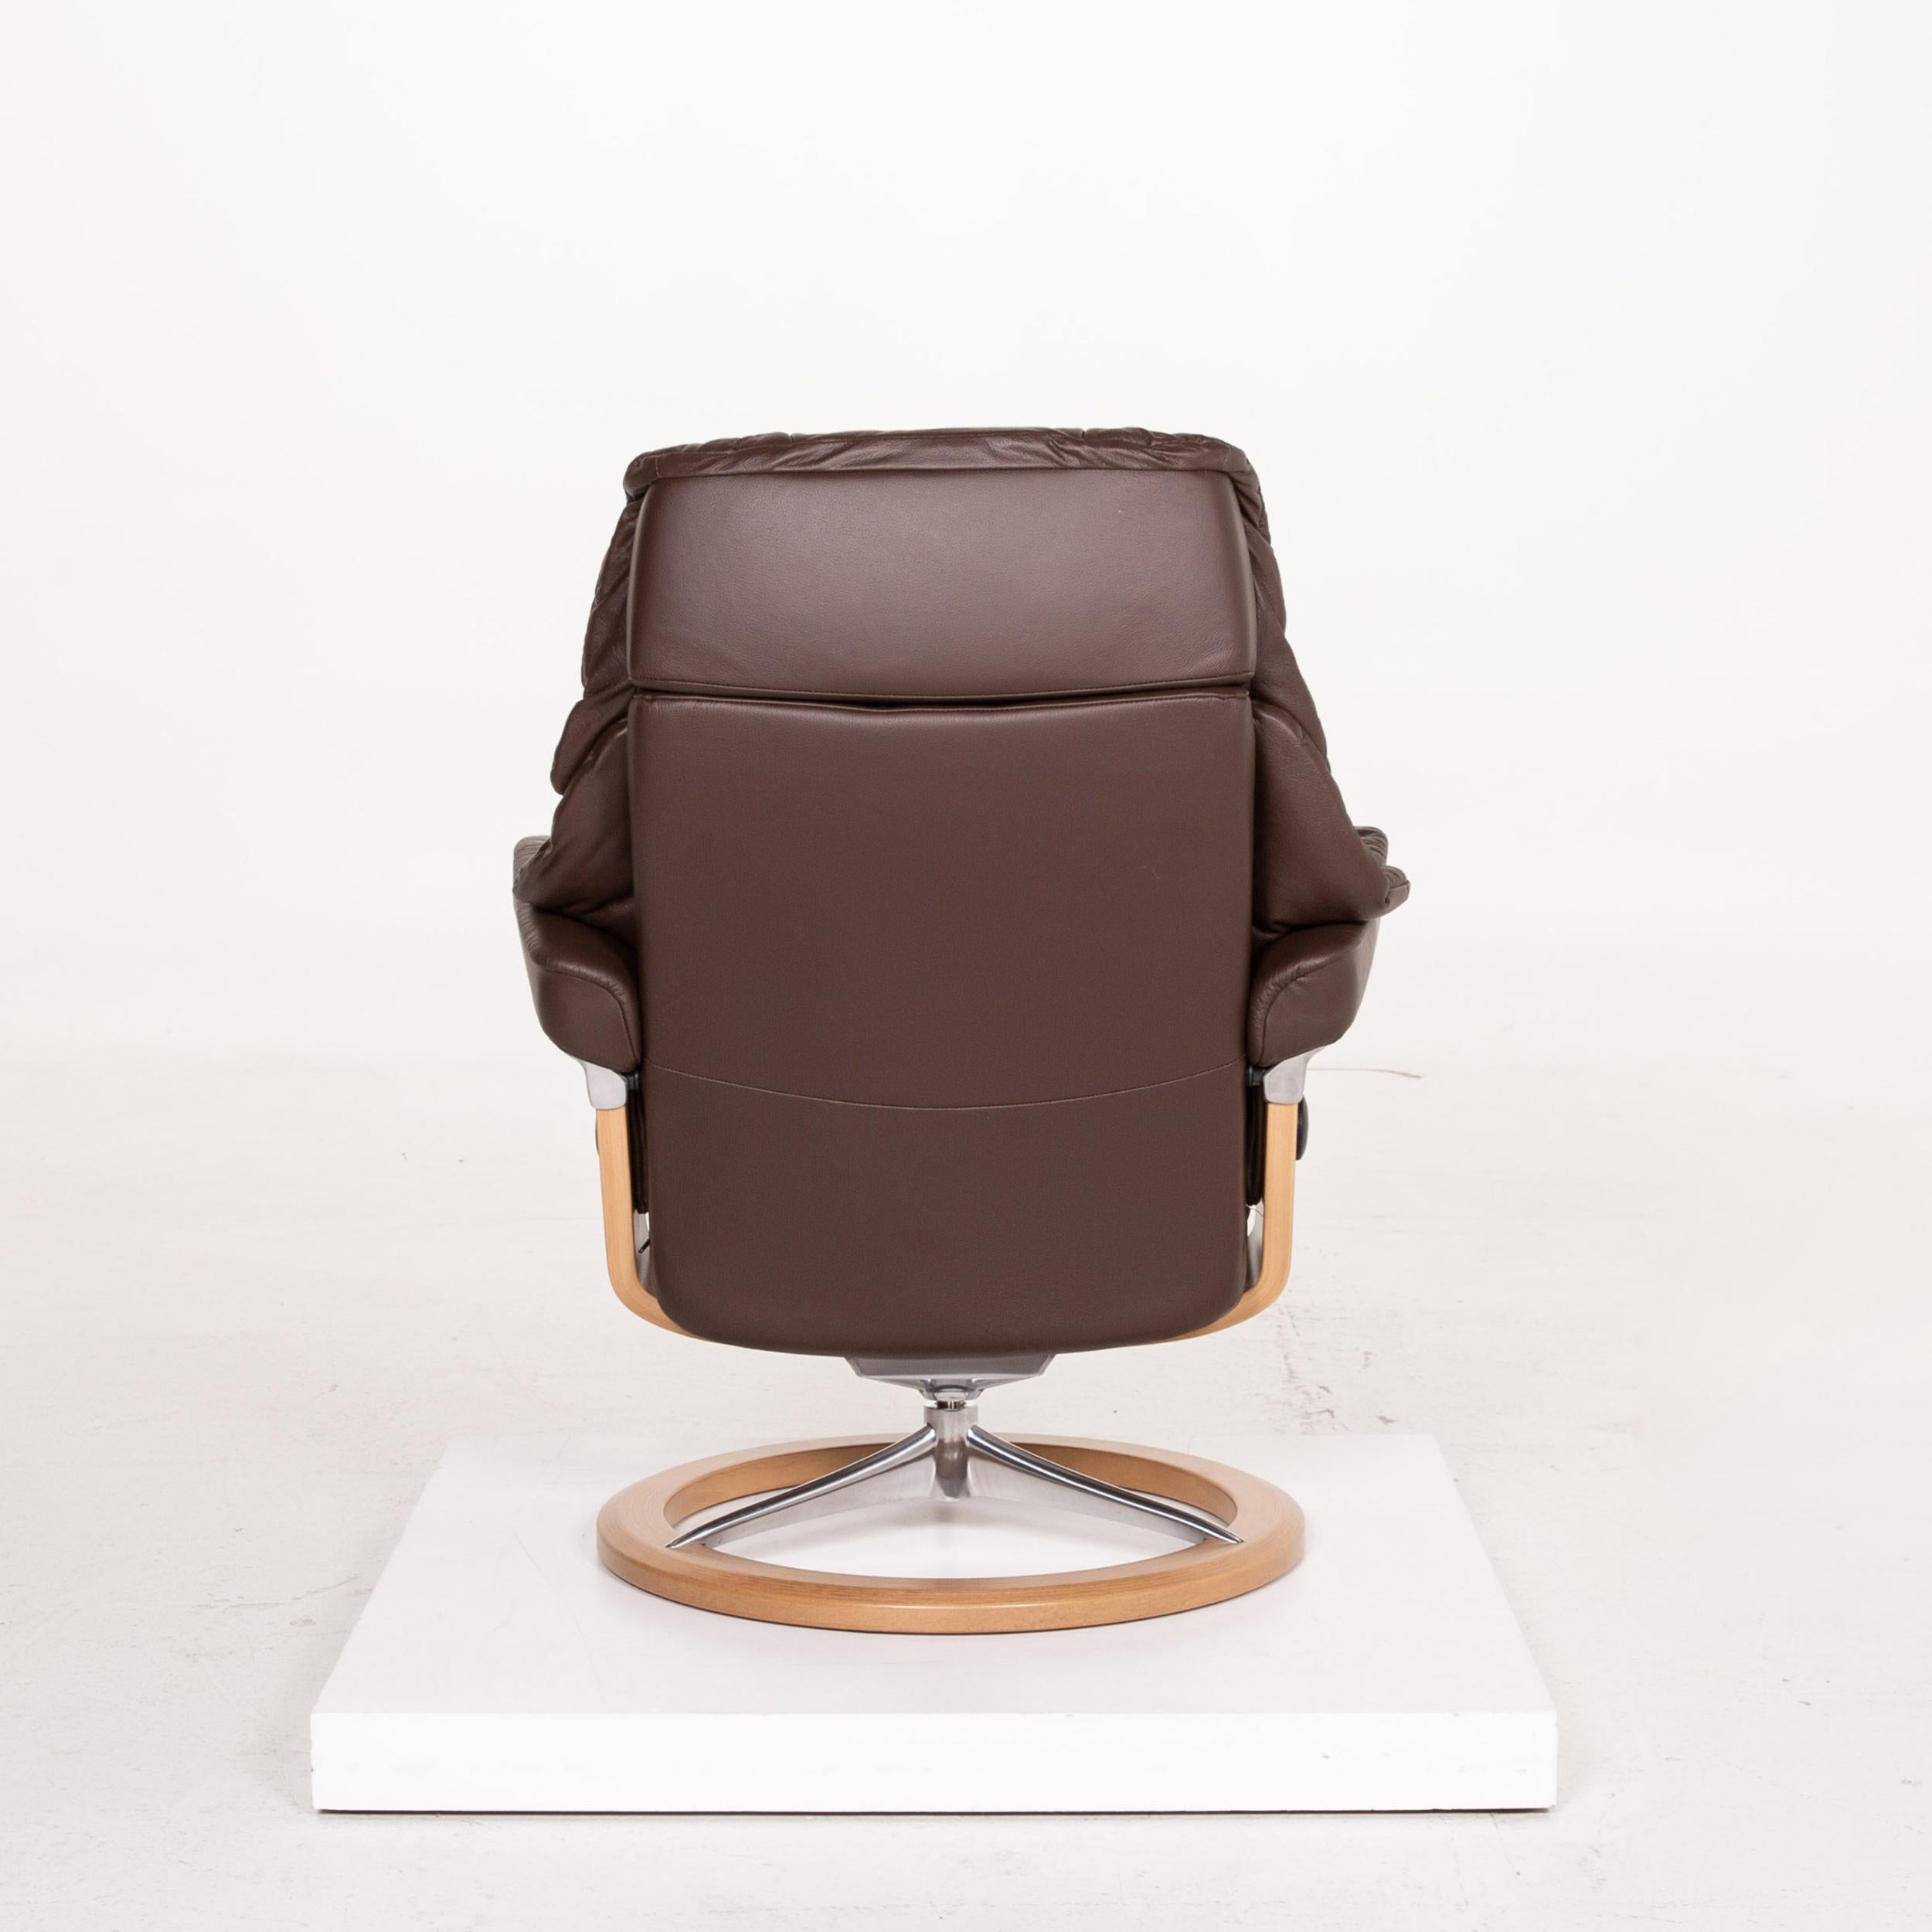 Stressless Reno Leather Armchair Incl. Stool Dark Brown Brown Relaxation 7